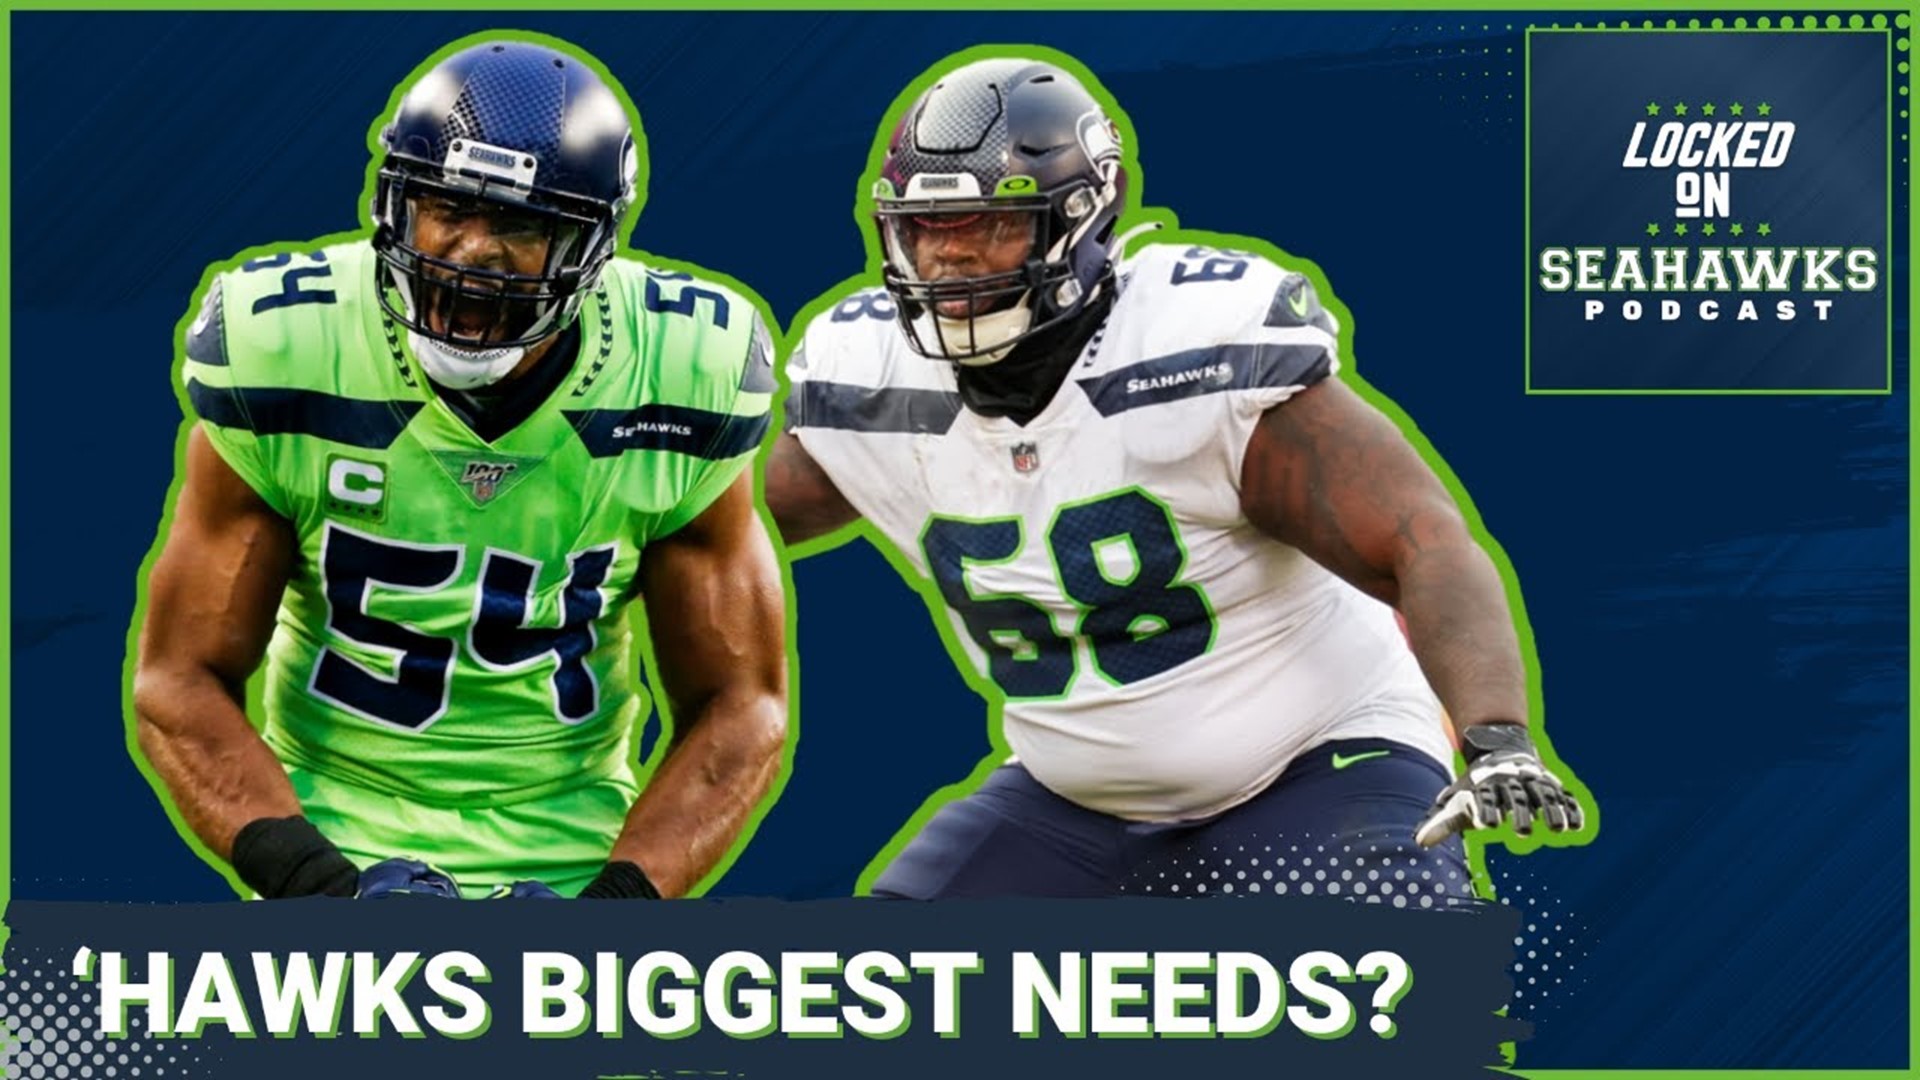 In the aftermath of this week's roster cuts and with free agency starting a week from today, the Seahawks have several substantial needs to address